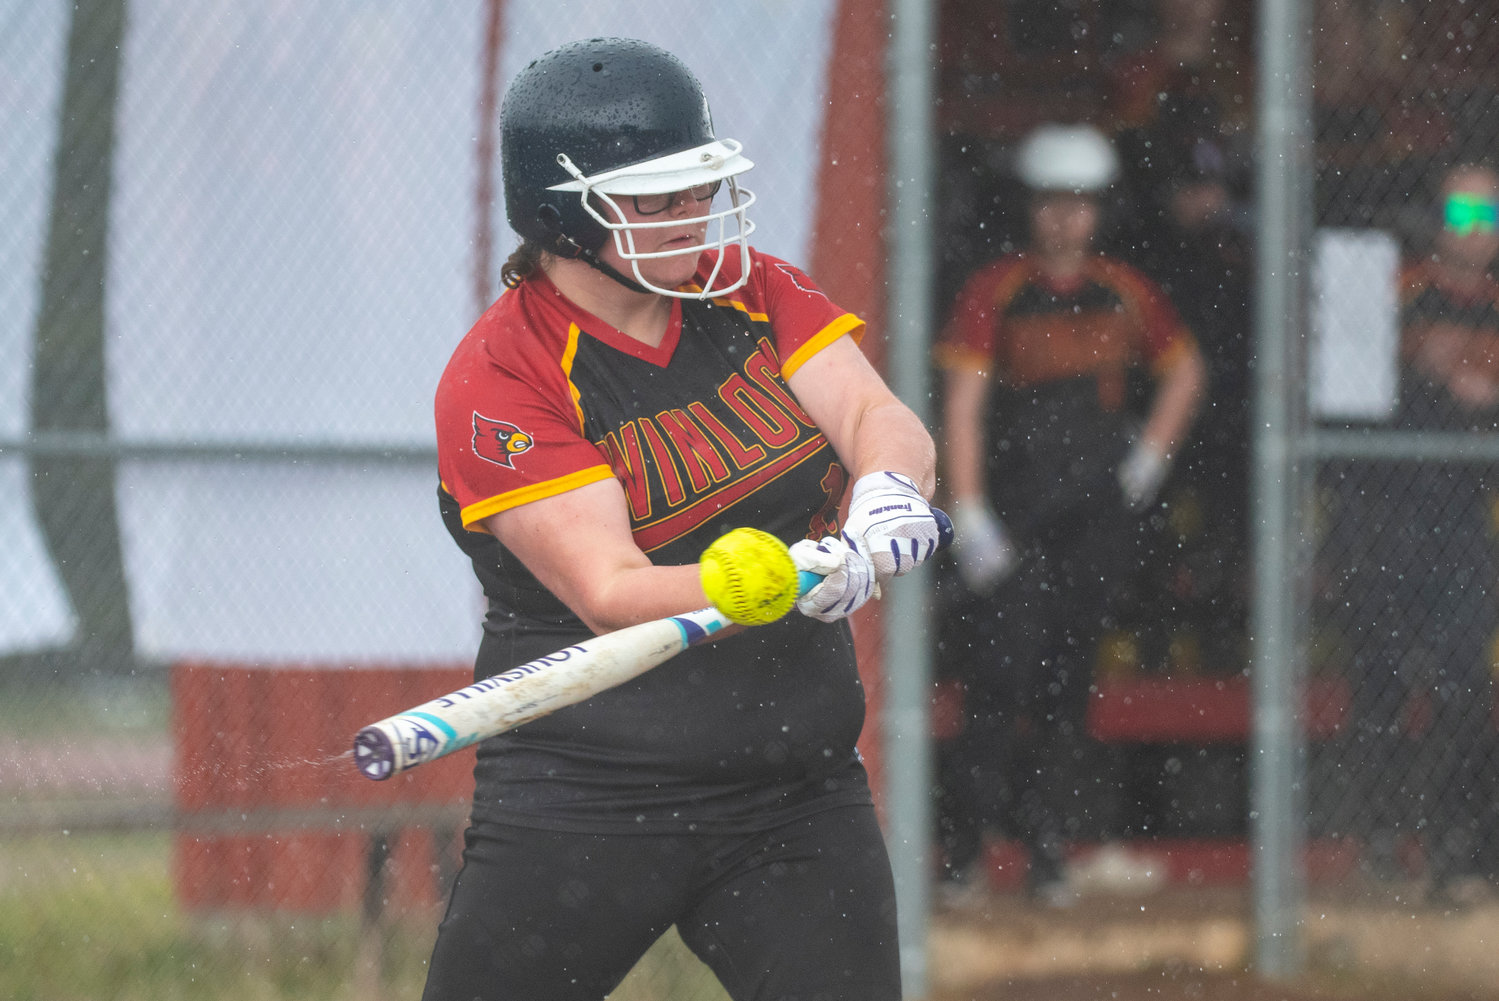 Winlock's Natasha Patton lines up an Onalaska pitch during a Central 2B League contest at home on Thursday, April 21.